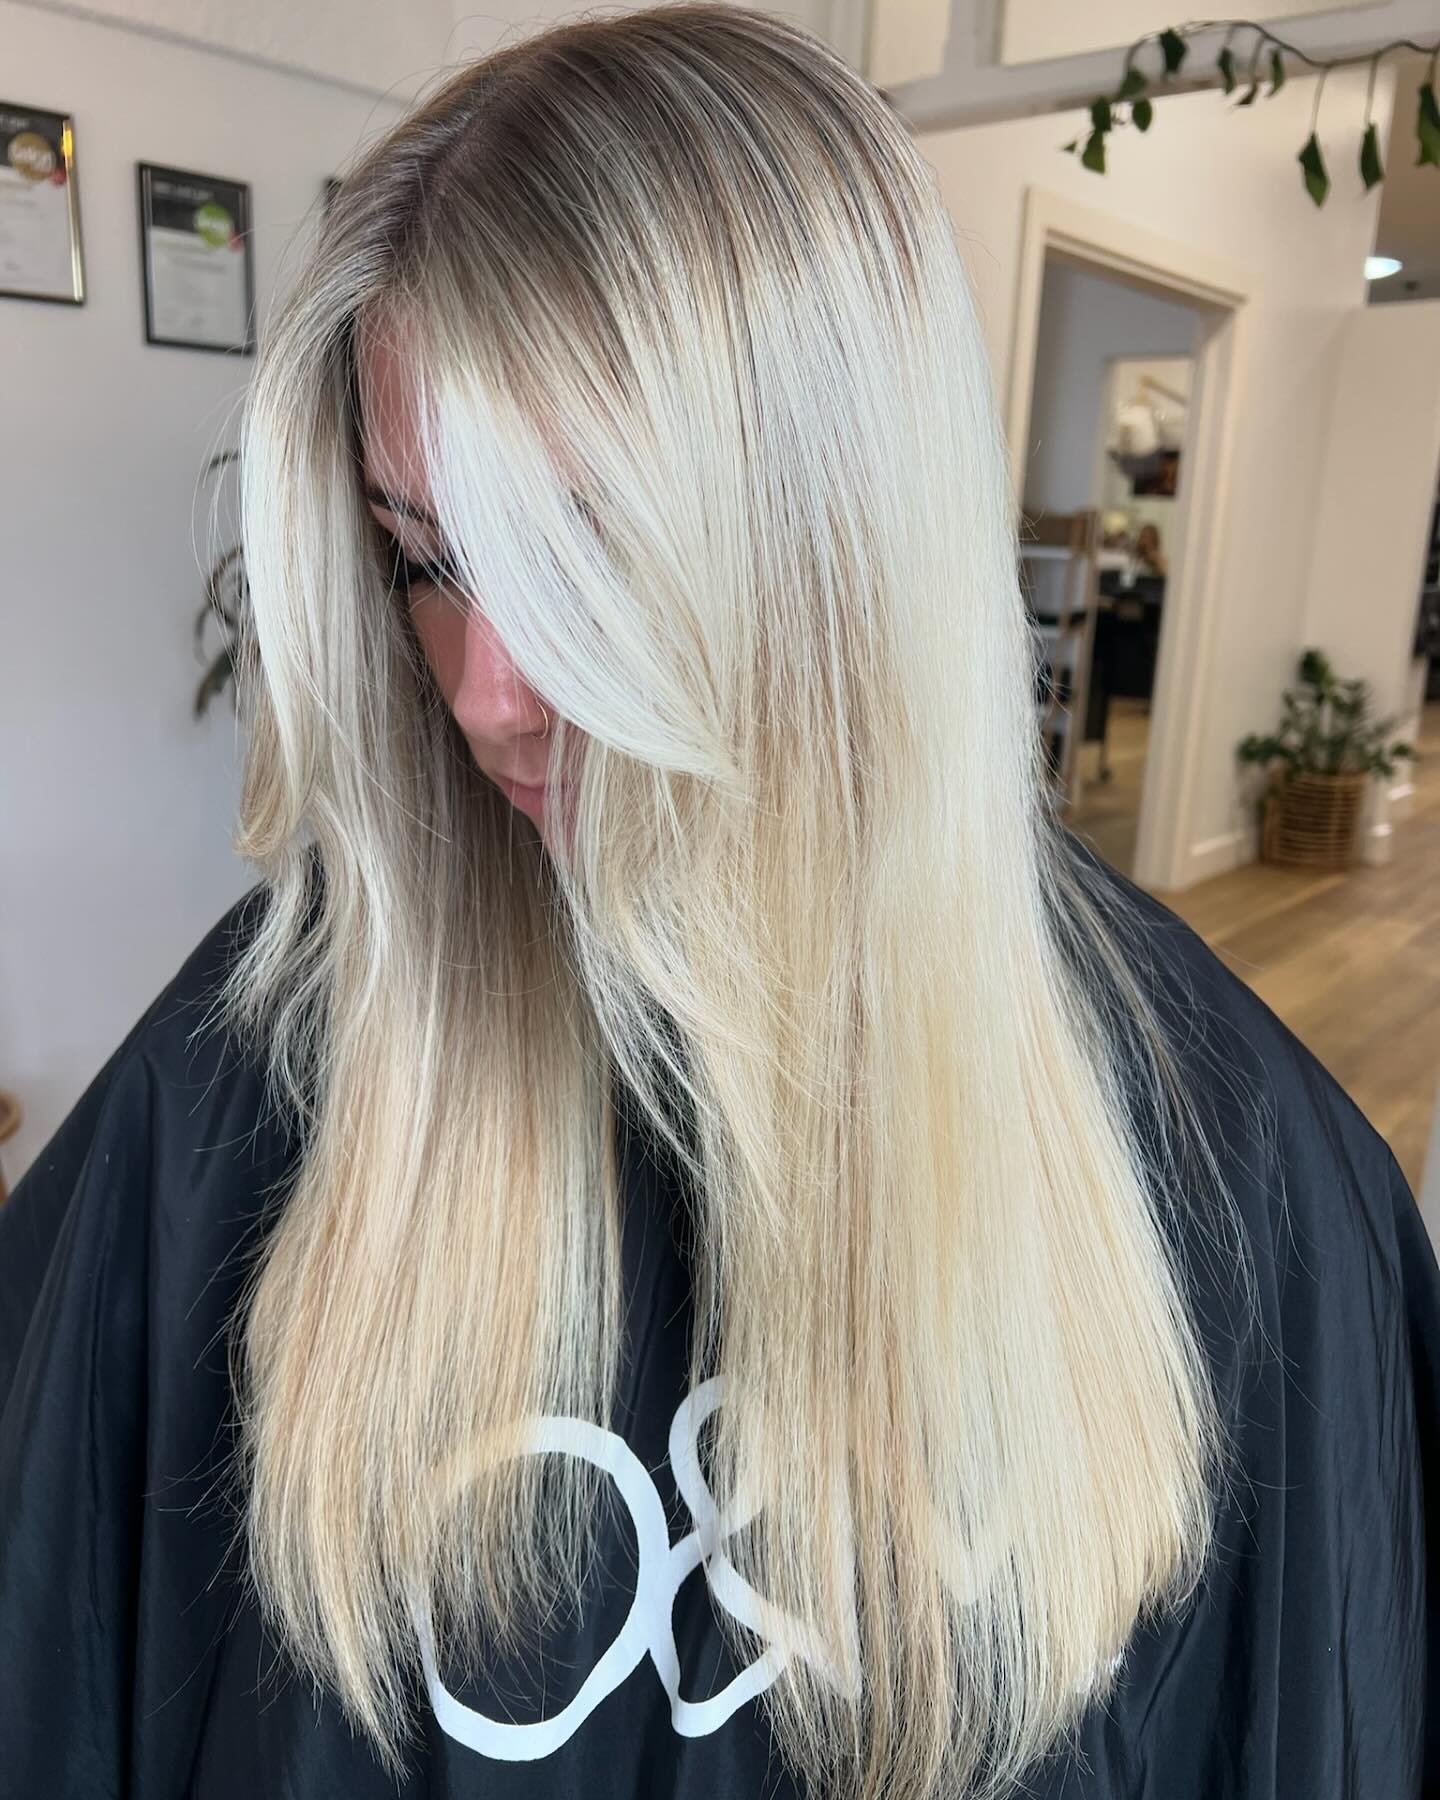 Turning it UP! This epic blonde is becoming a signature of @georgia_jadshairdressers 🔥🔥🔥

Colour 👉🏼 @originalmineral 

Products 👉🏼 @nineyardsaustralia 

#brightblonde #poppingblonde #blondegoals #blondehair #blondespecialist #originalmineral #